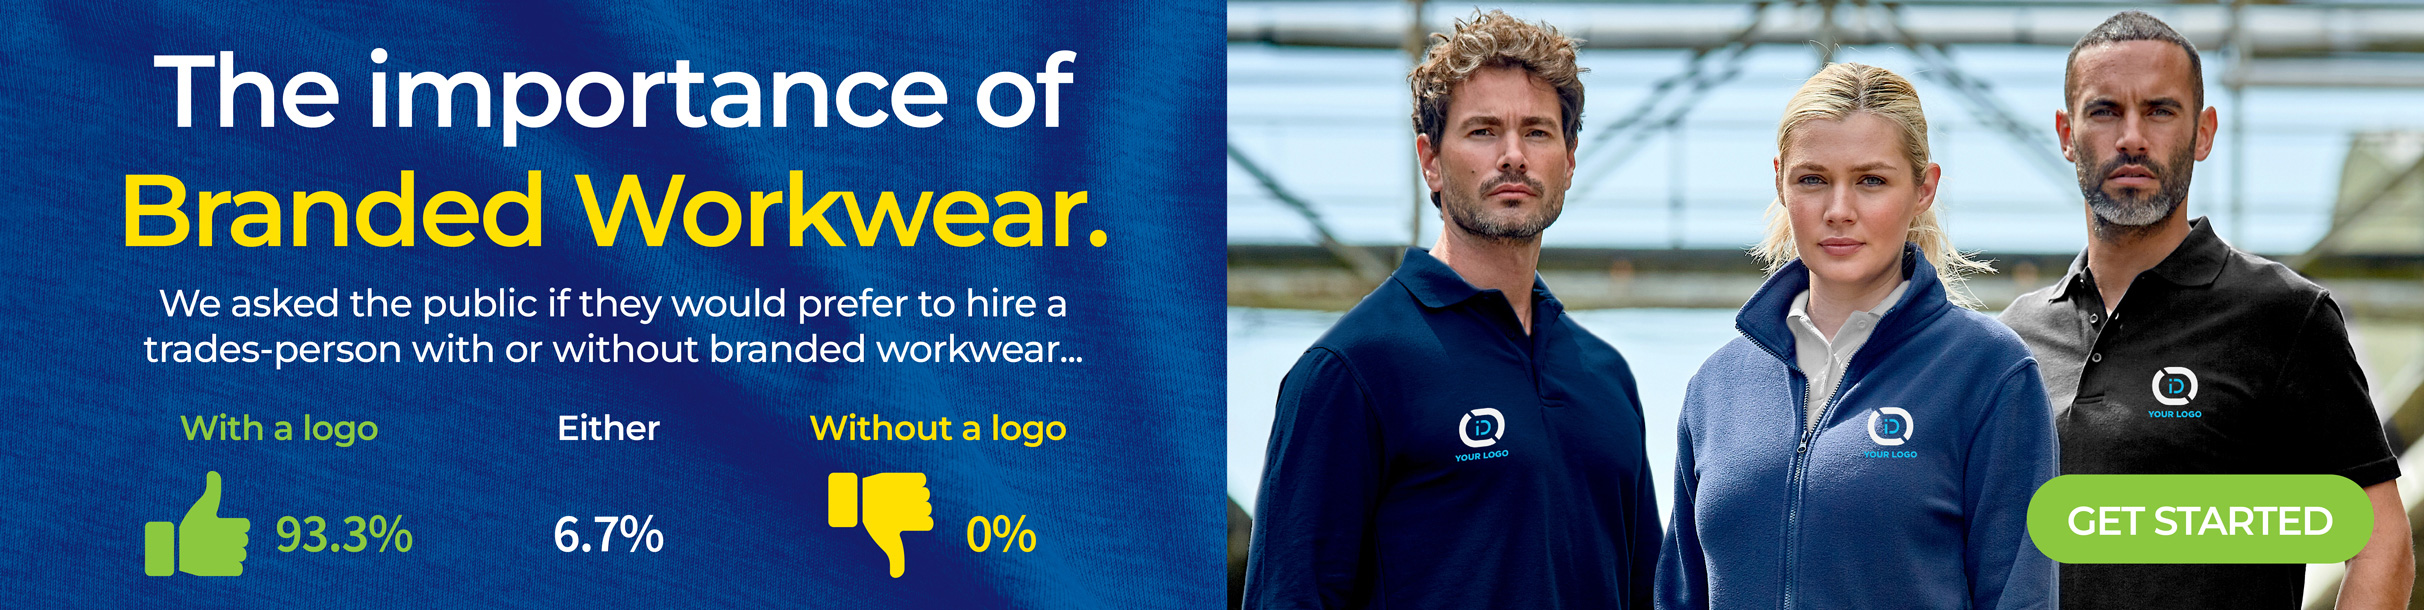 Premium Pro Polo Shirt - Tailored for Professionals by Create Workwear & Toolstation